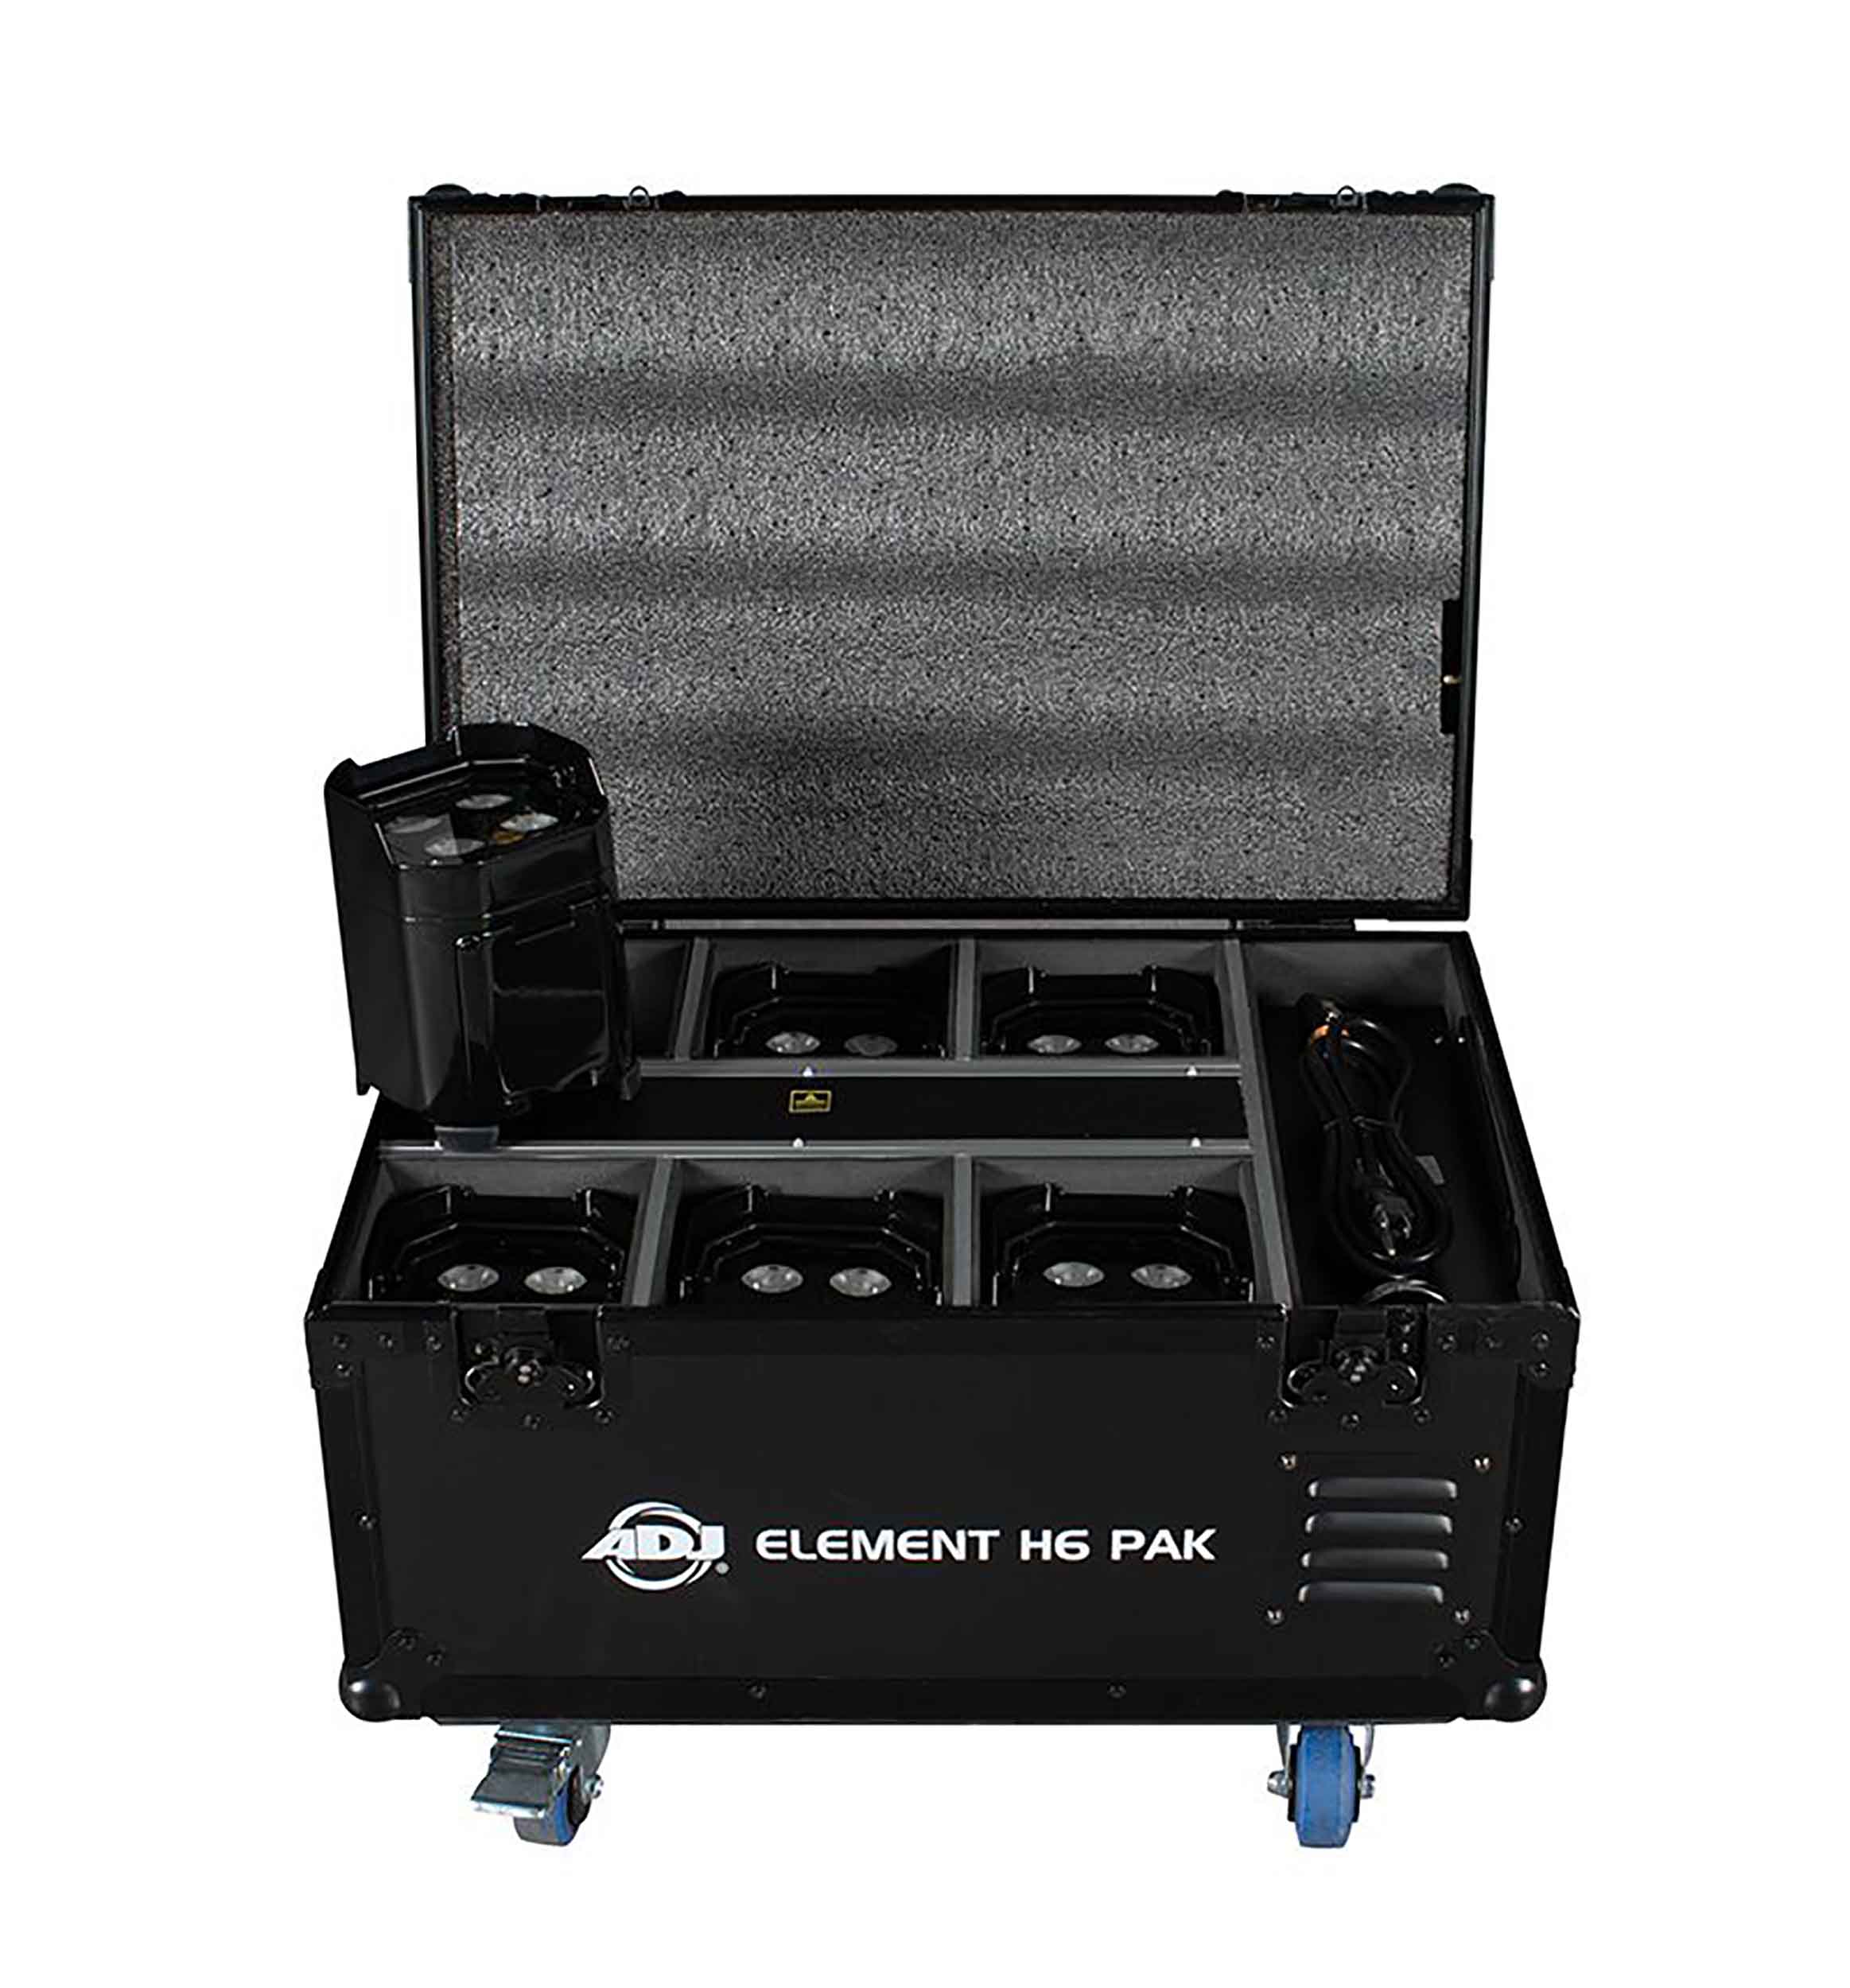 ADJ Element H6, Event Up Lighting System With (6) IP54-Rated Black Fixtures and Charging Flight Case by ADJ